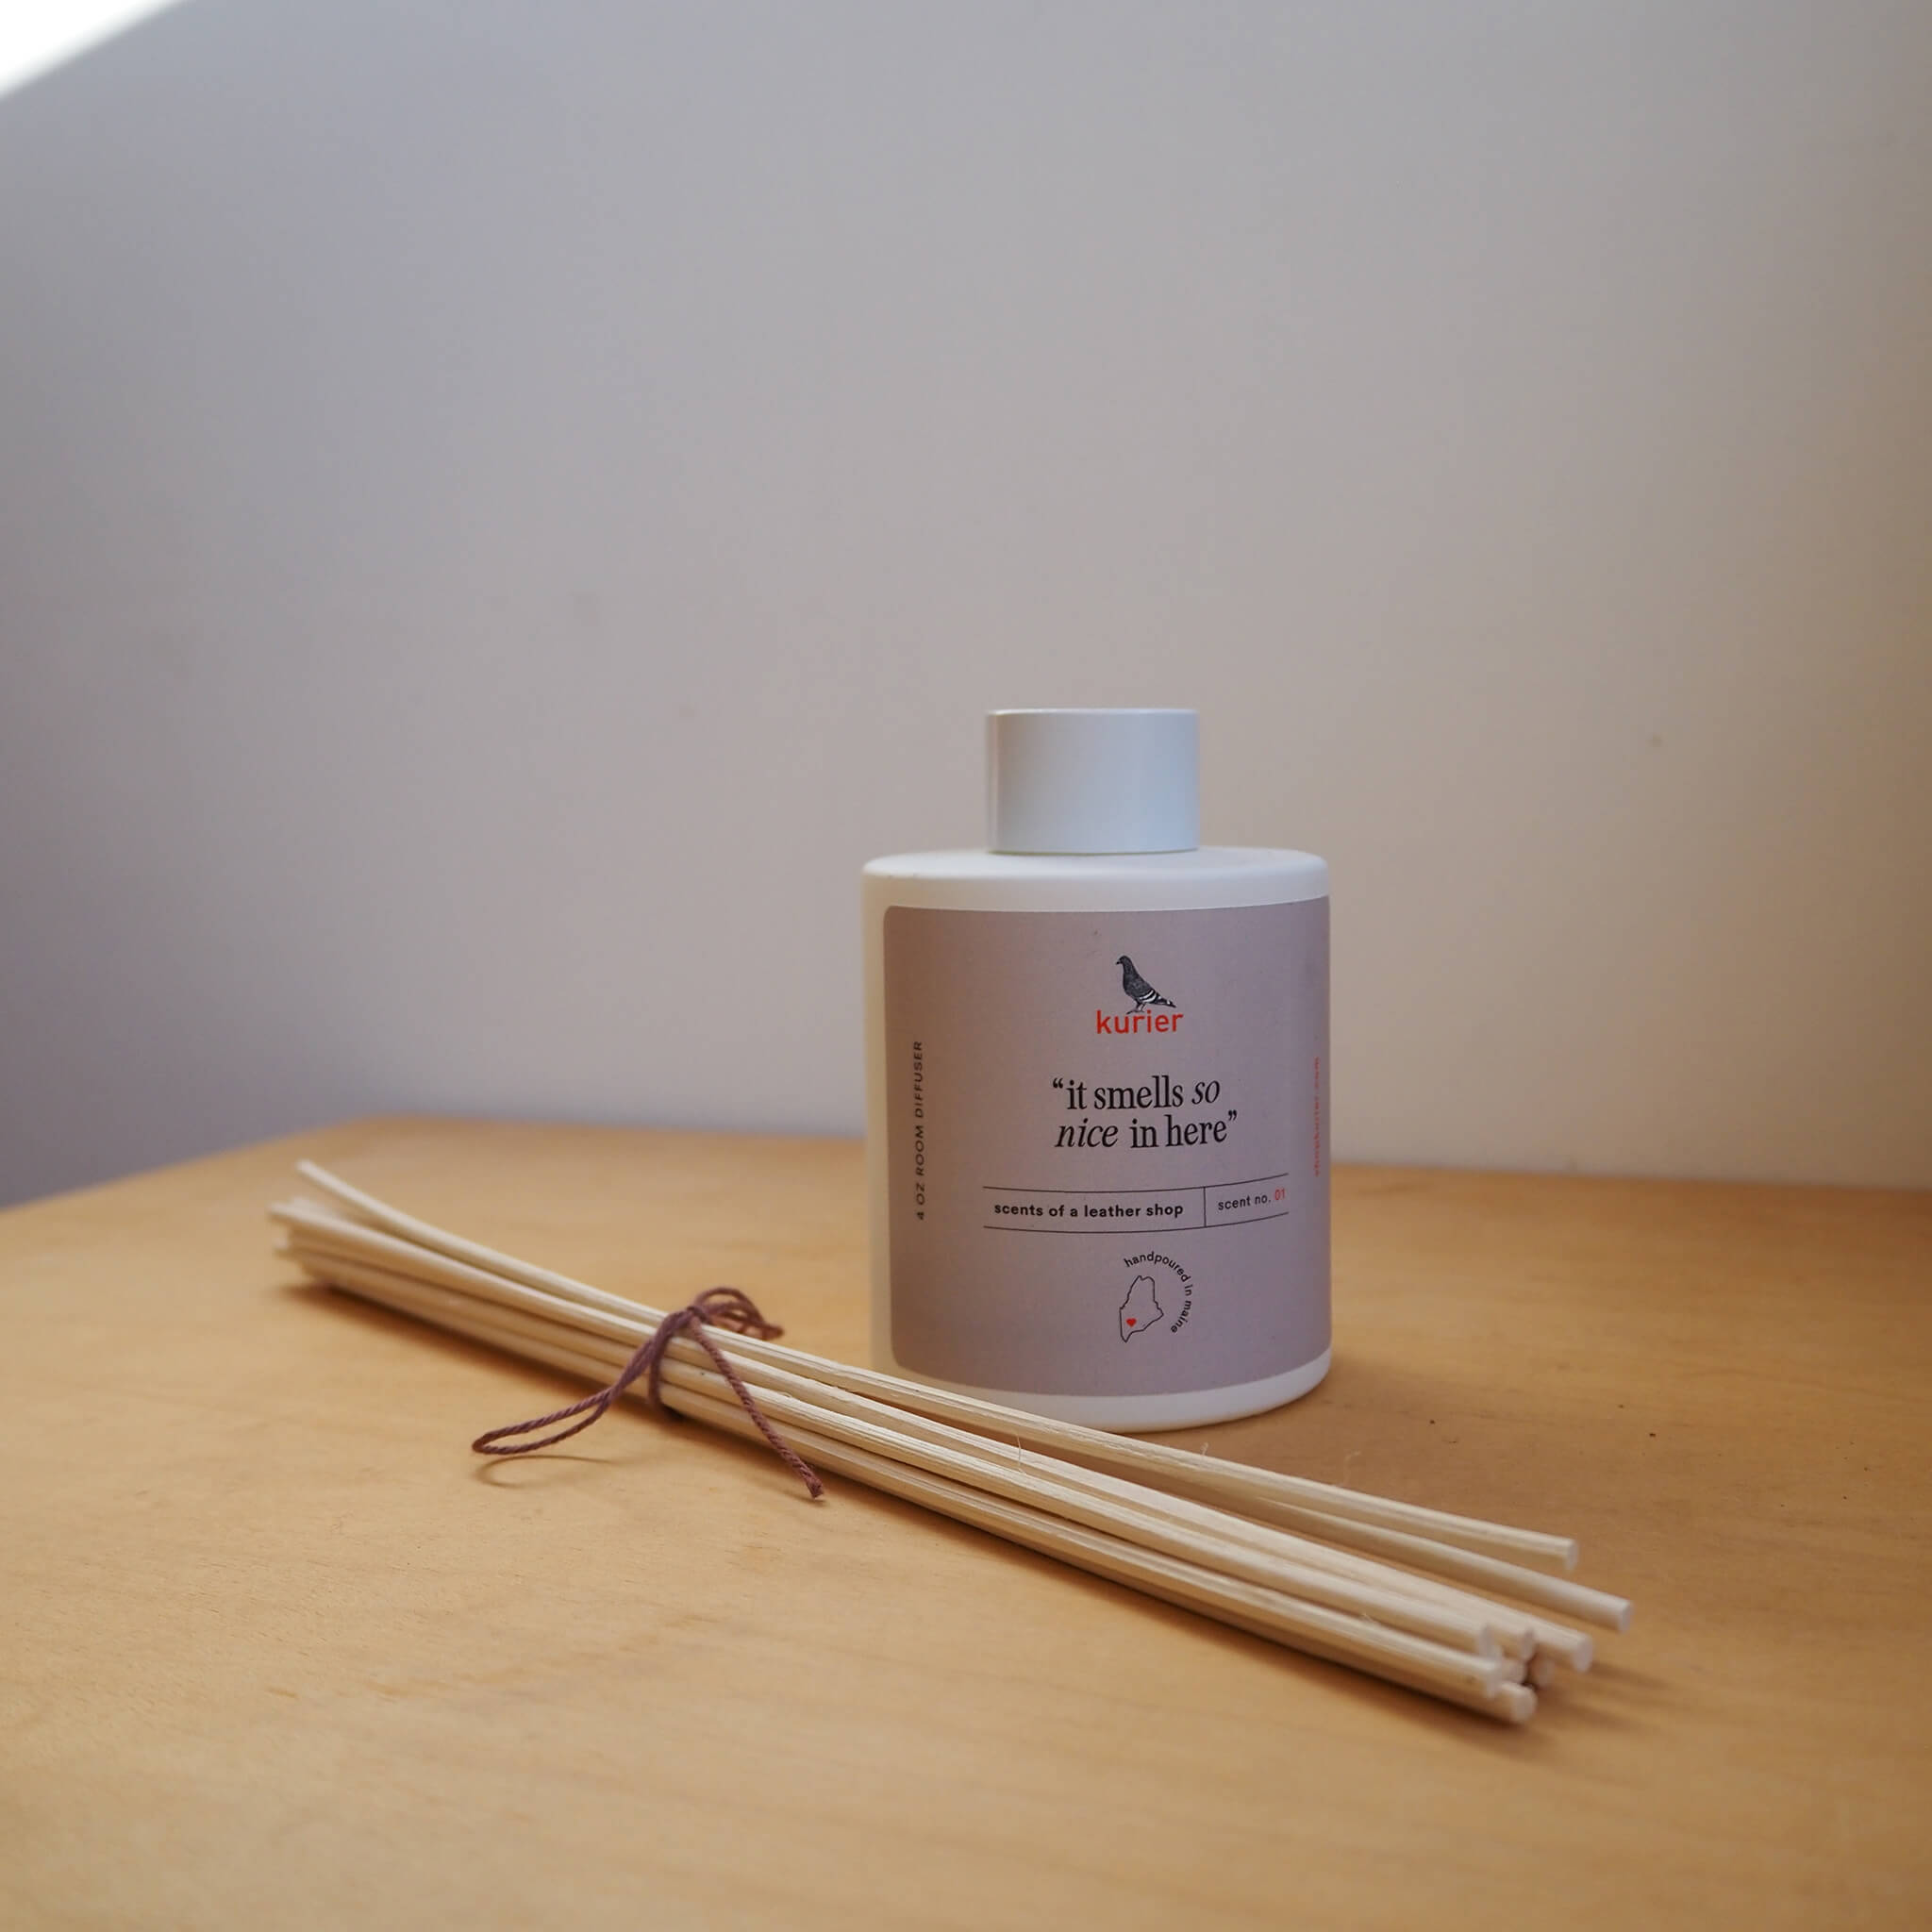 kurier's signature scented goods - room diffuser - "it smells so nice in here"